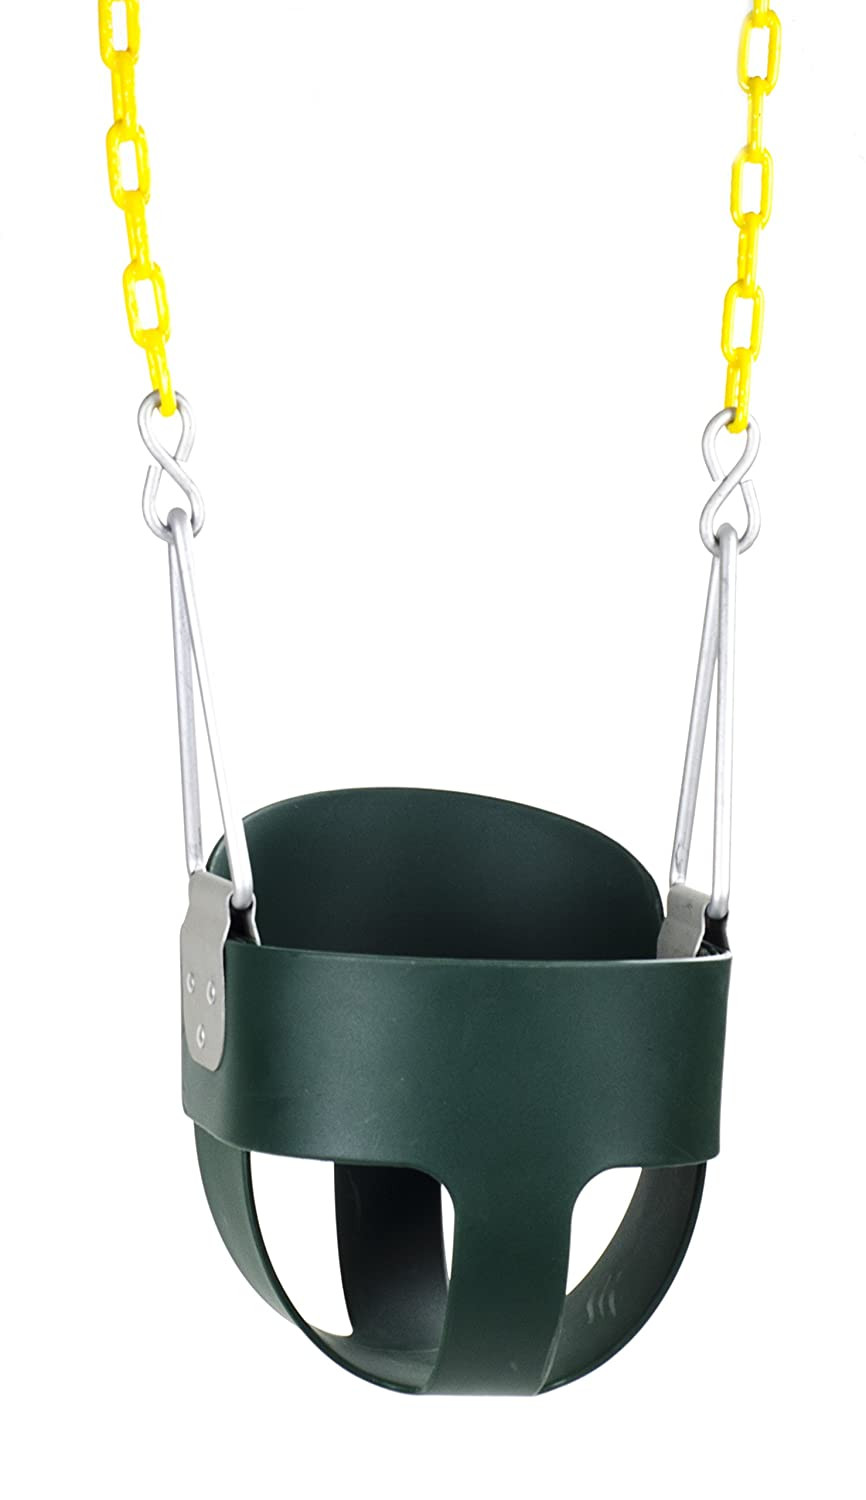 Kids Bucket Swing
 Spring Is ing and Here Is The BEST Baby Outdoor Swing